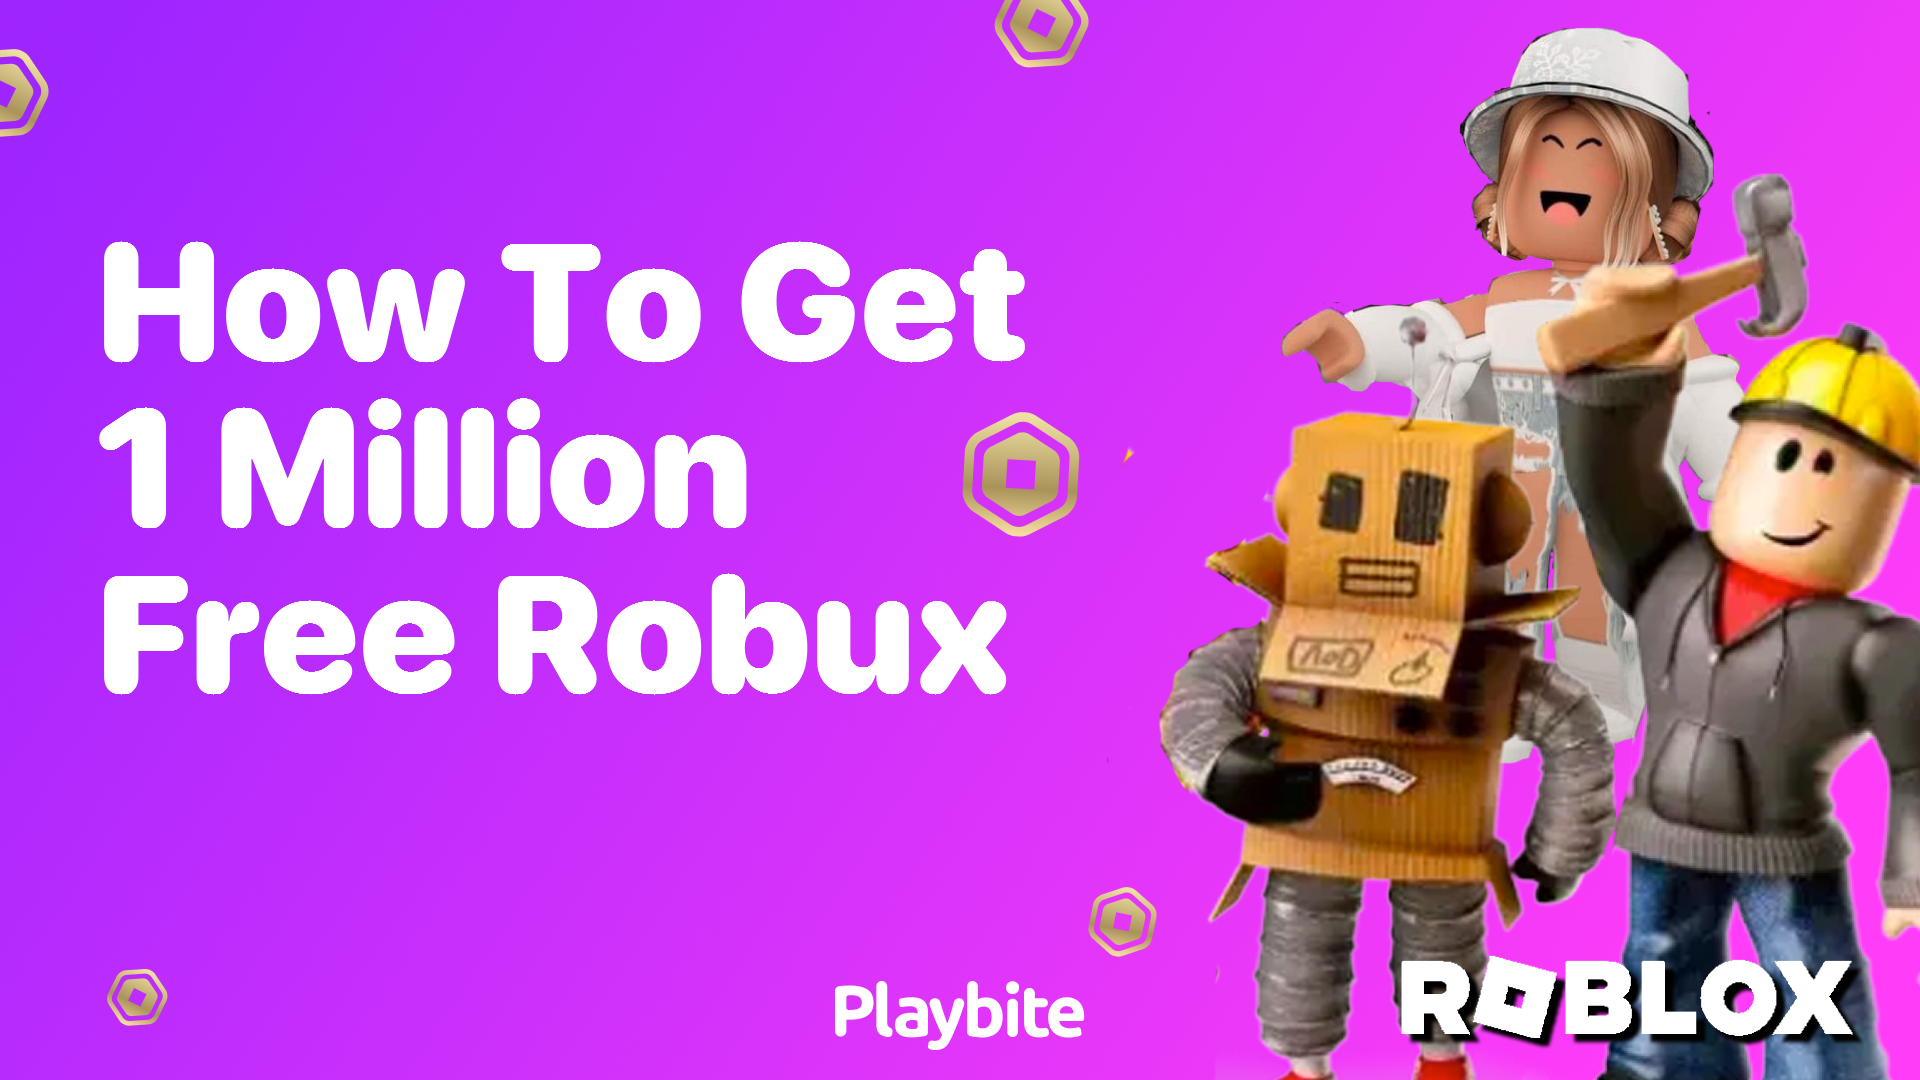 How to Get 1 Million Free Robux: Exploring Your Options